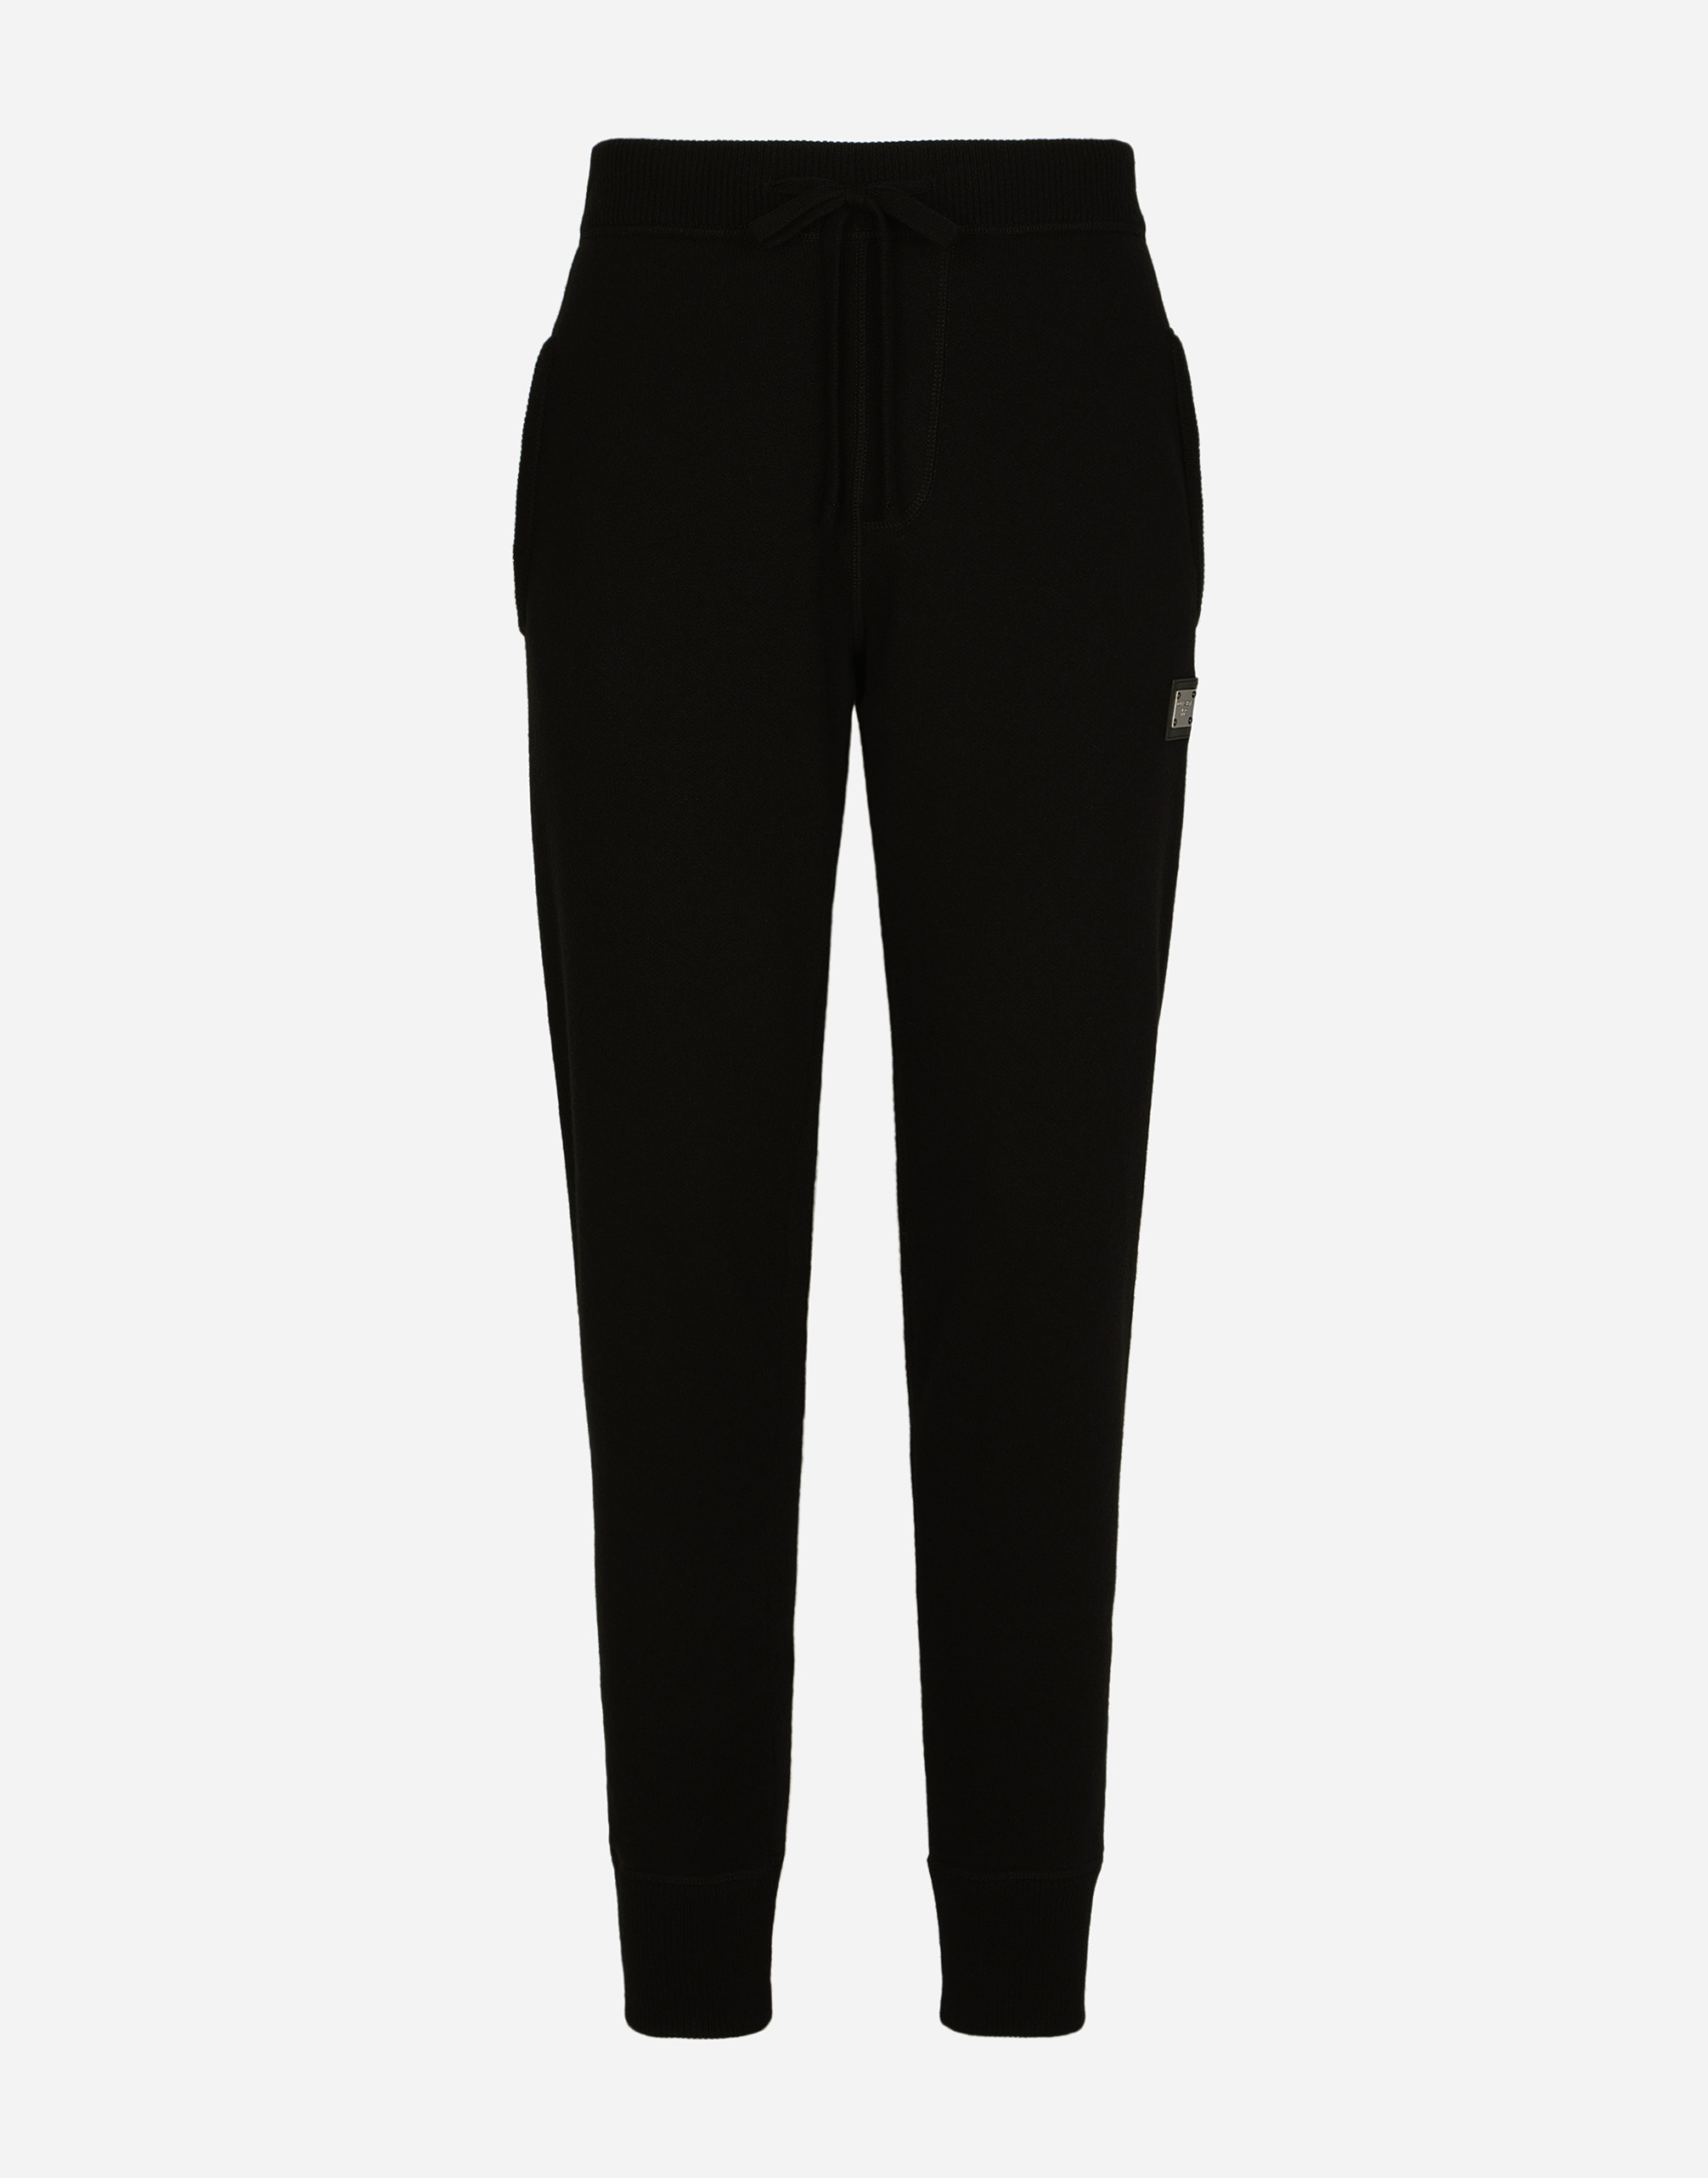 Wool and cashmere knit jogging pants in Black